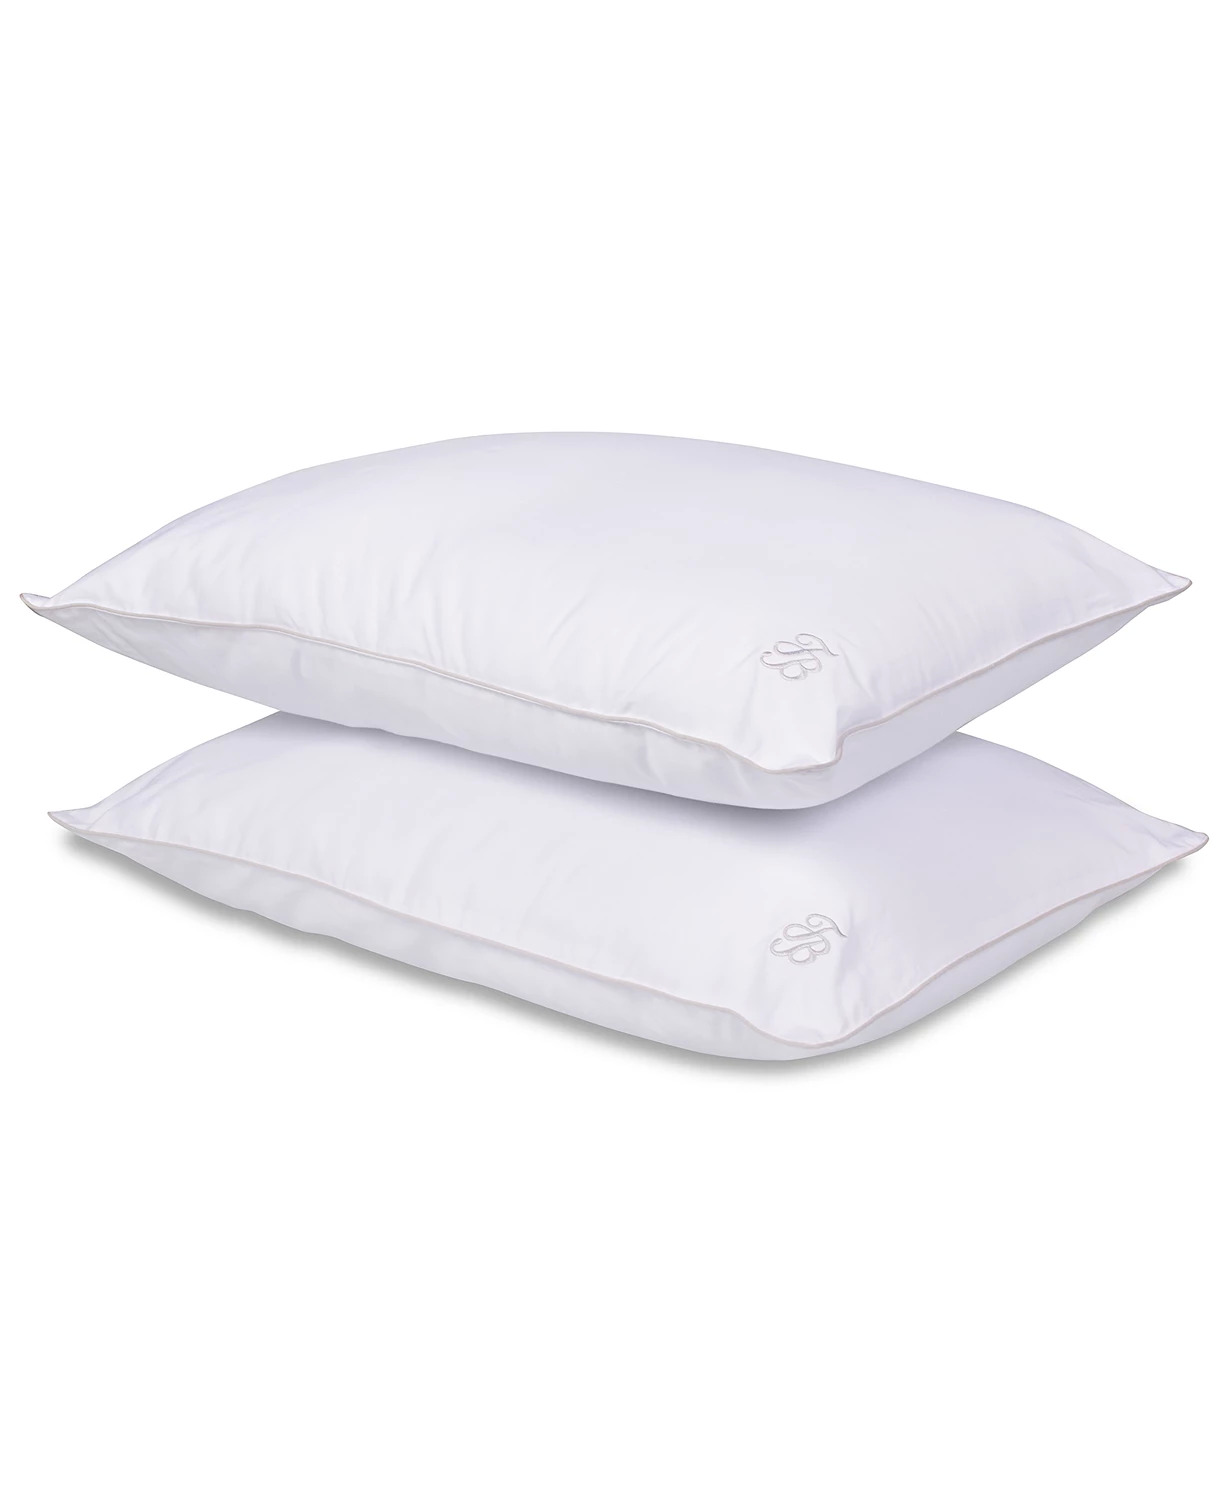 2-Pack Tommy Bahama Home Enhanced Support Pillows (Standard) $6.96 ($3.48 Each) or less w/ SD Cashback + Free Store Pickup at Macy's or FS on $25+